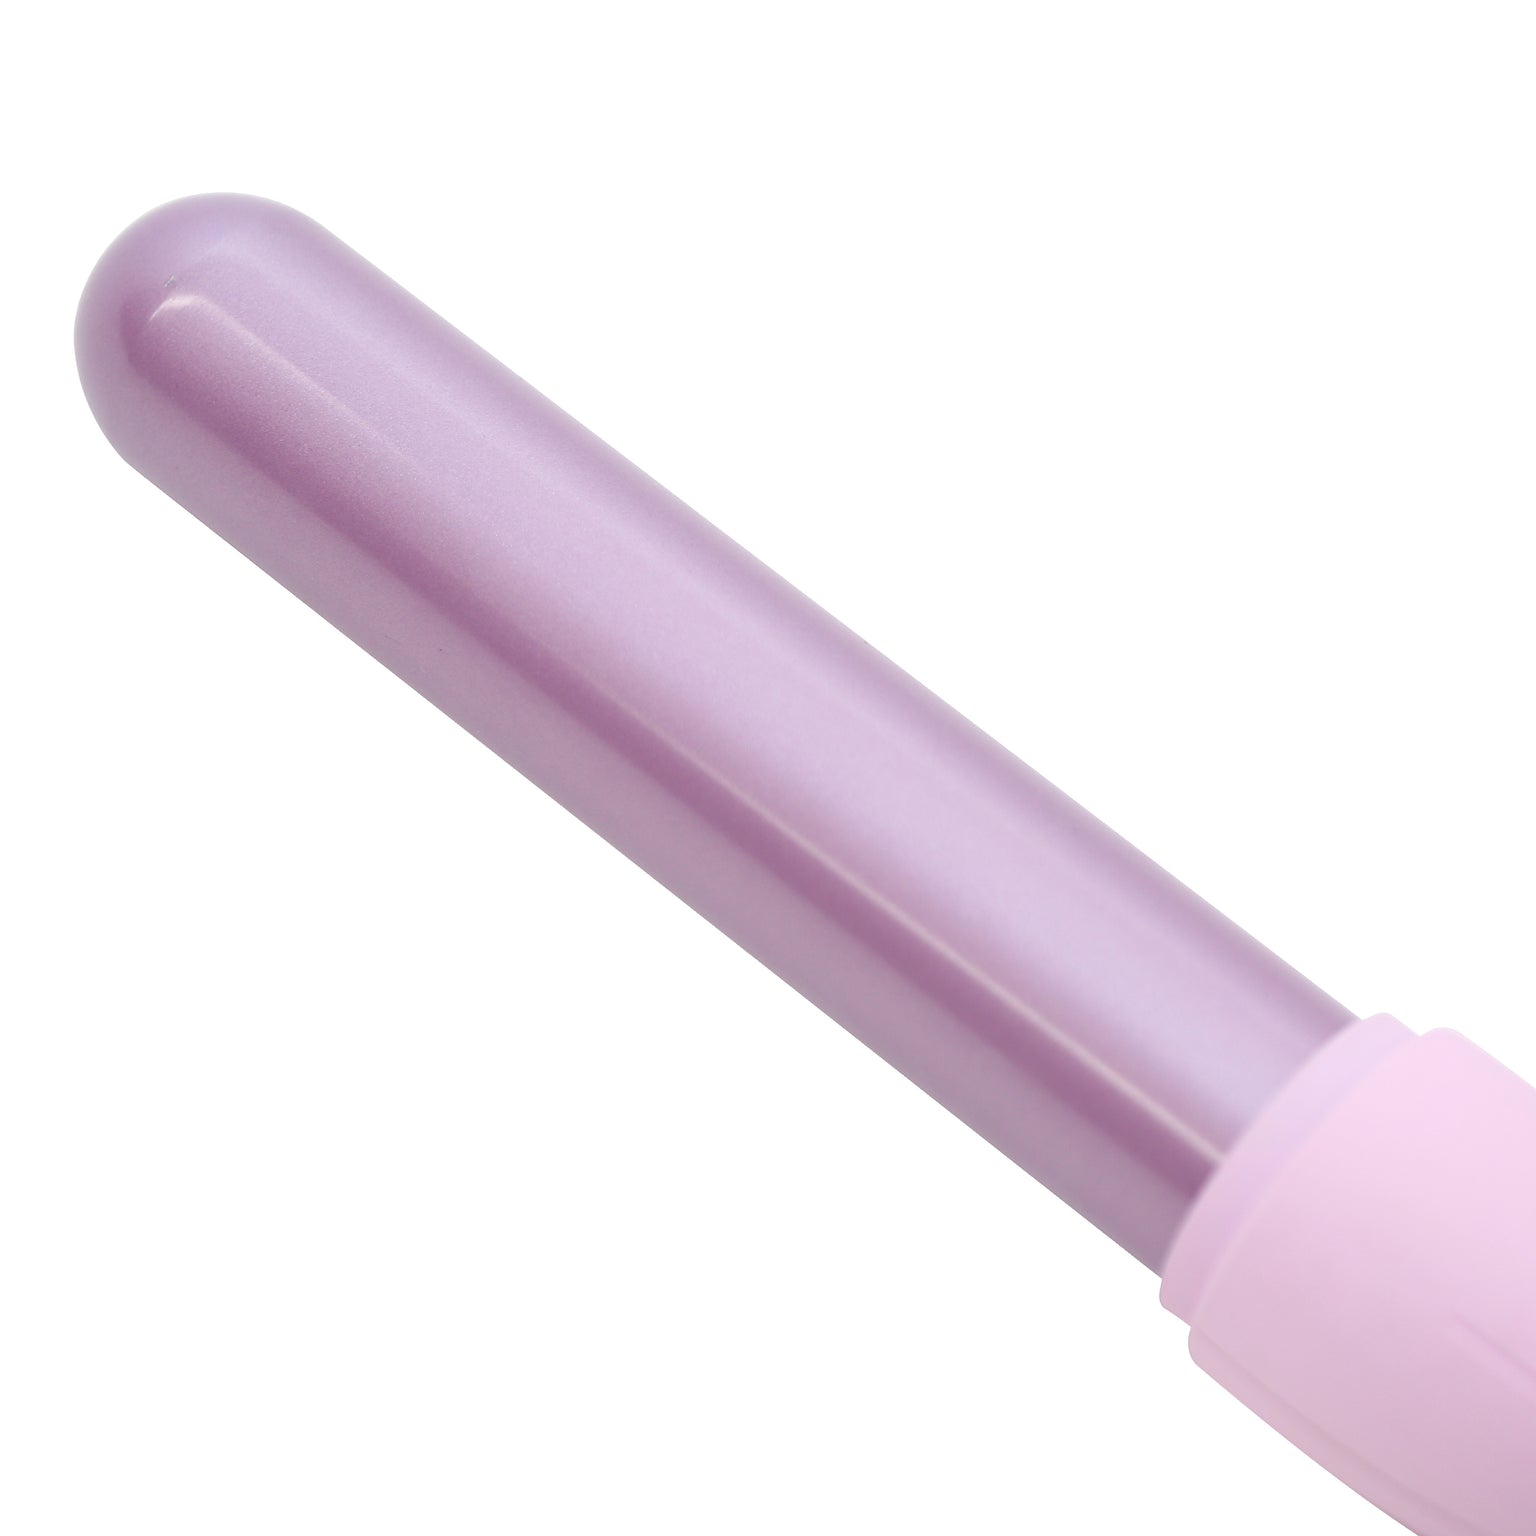 Lavender 1.25 inch Curling Wand Limited Edition